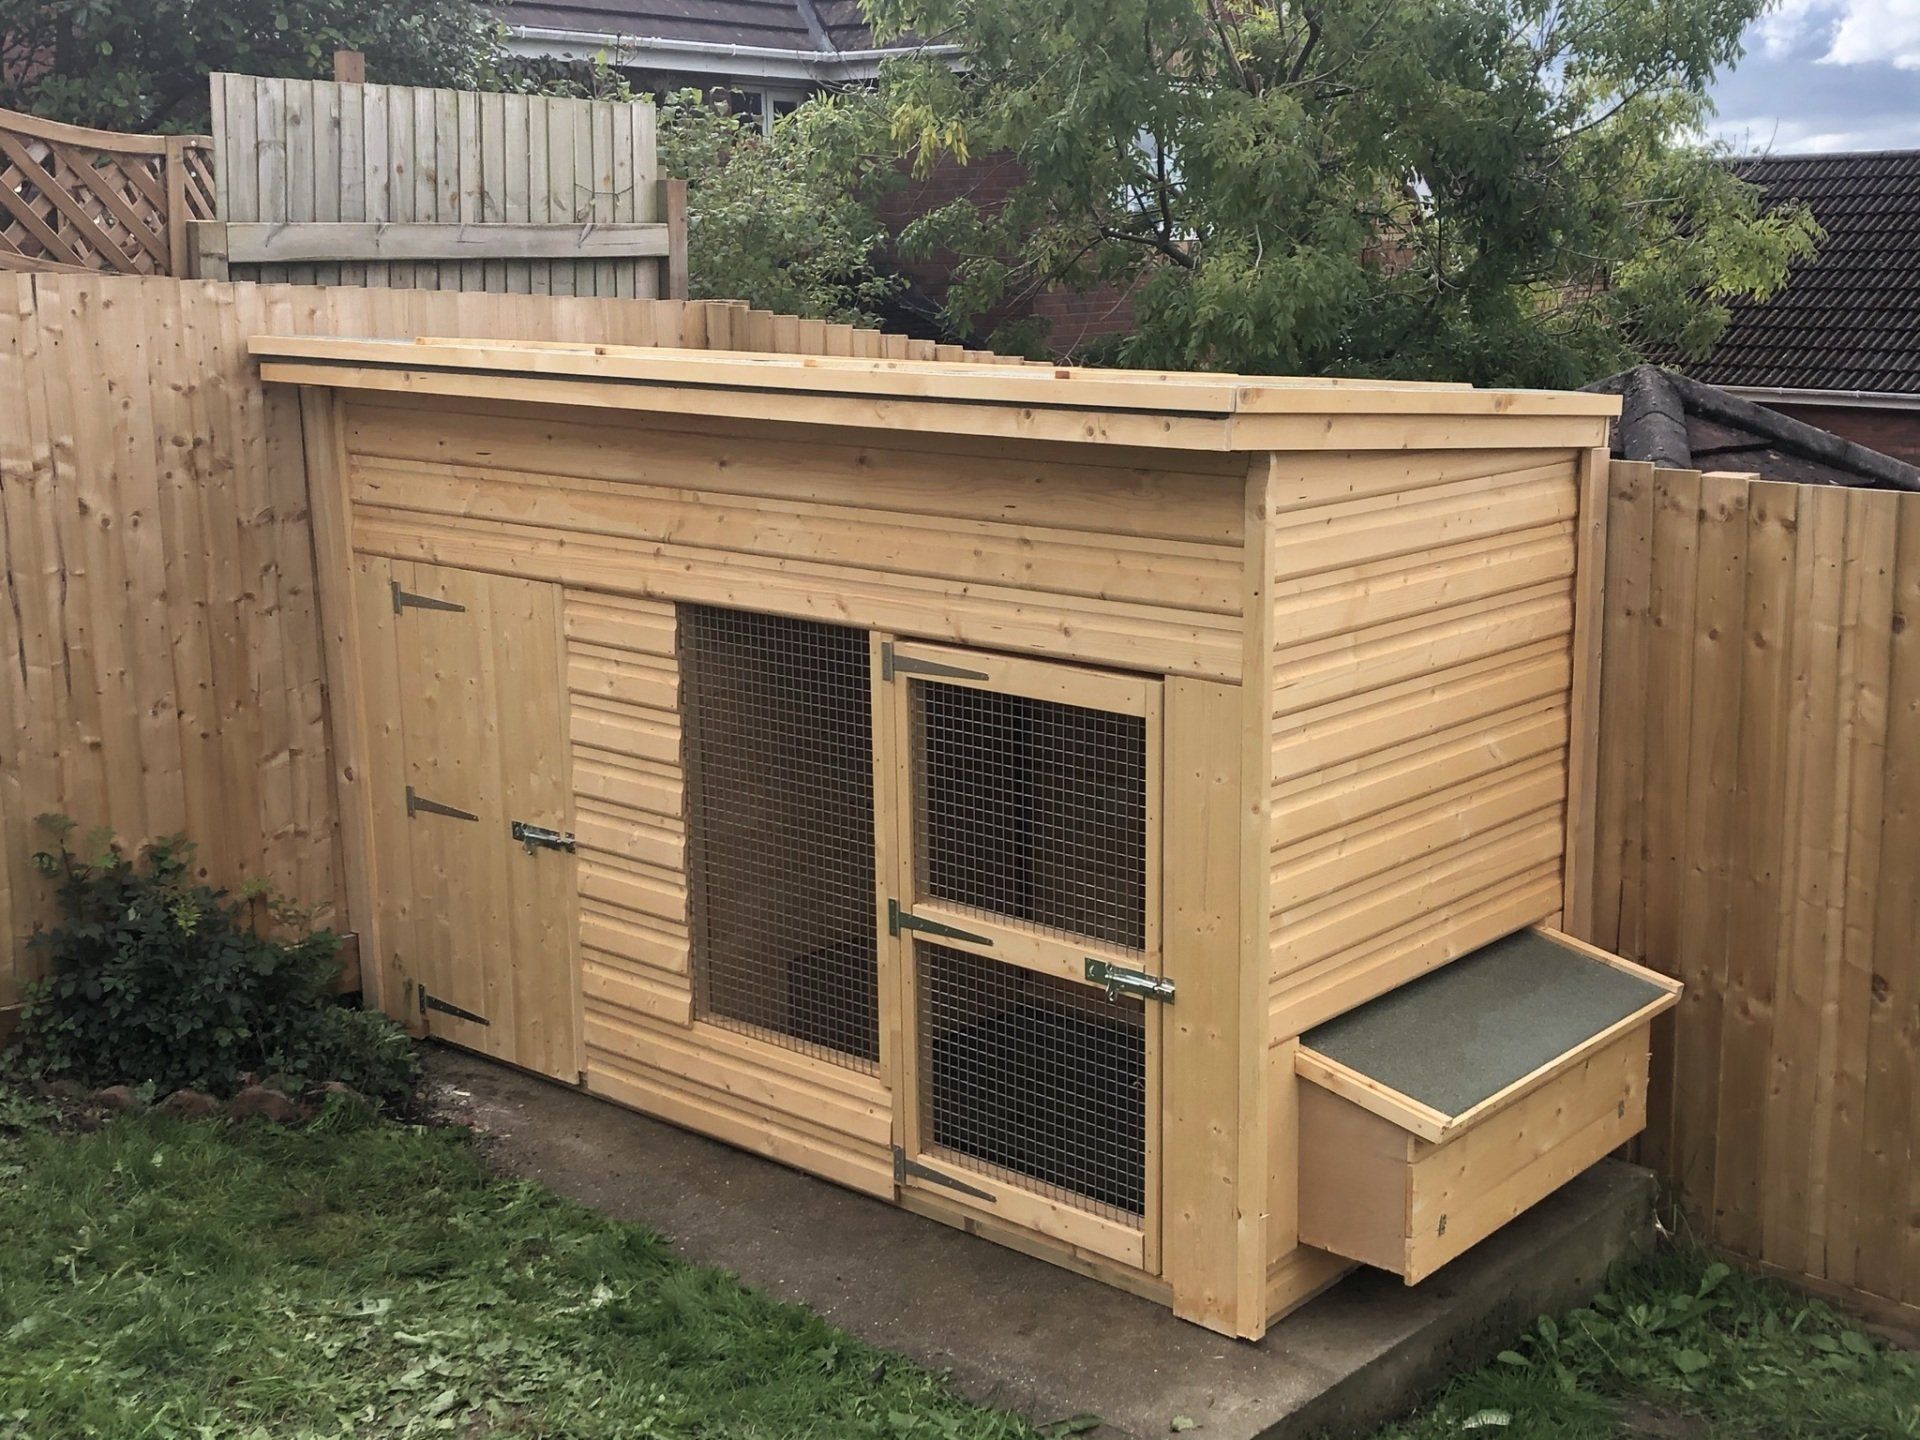 Our kennel style used for a chicken shed and run. 9' x 4' with nest box on the 4' side. Perfect to house chickens at home.